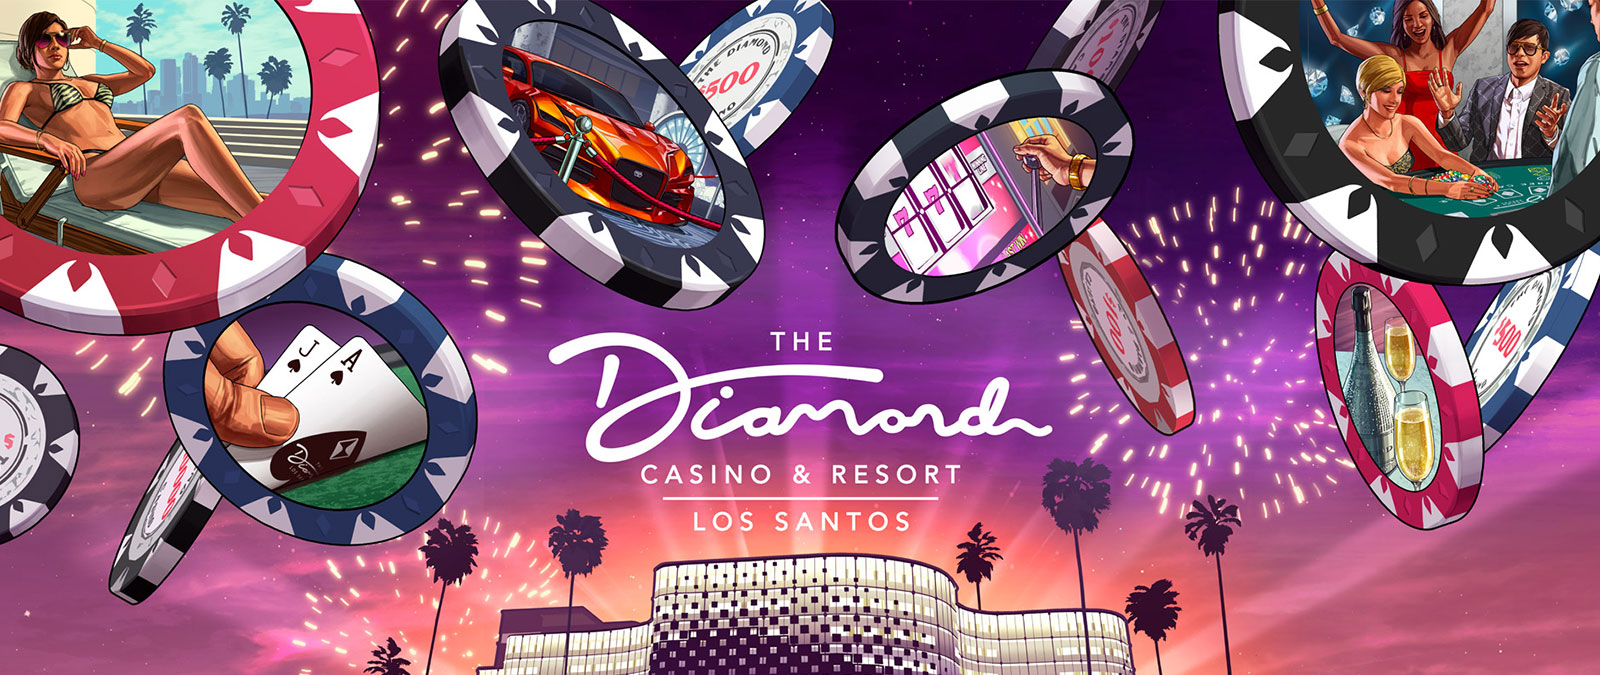 The Diamond Casino & Resort, Los Santos logo, front view of a building with palm trees, fireworks, and casino chips falling with various images on them